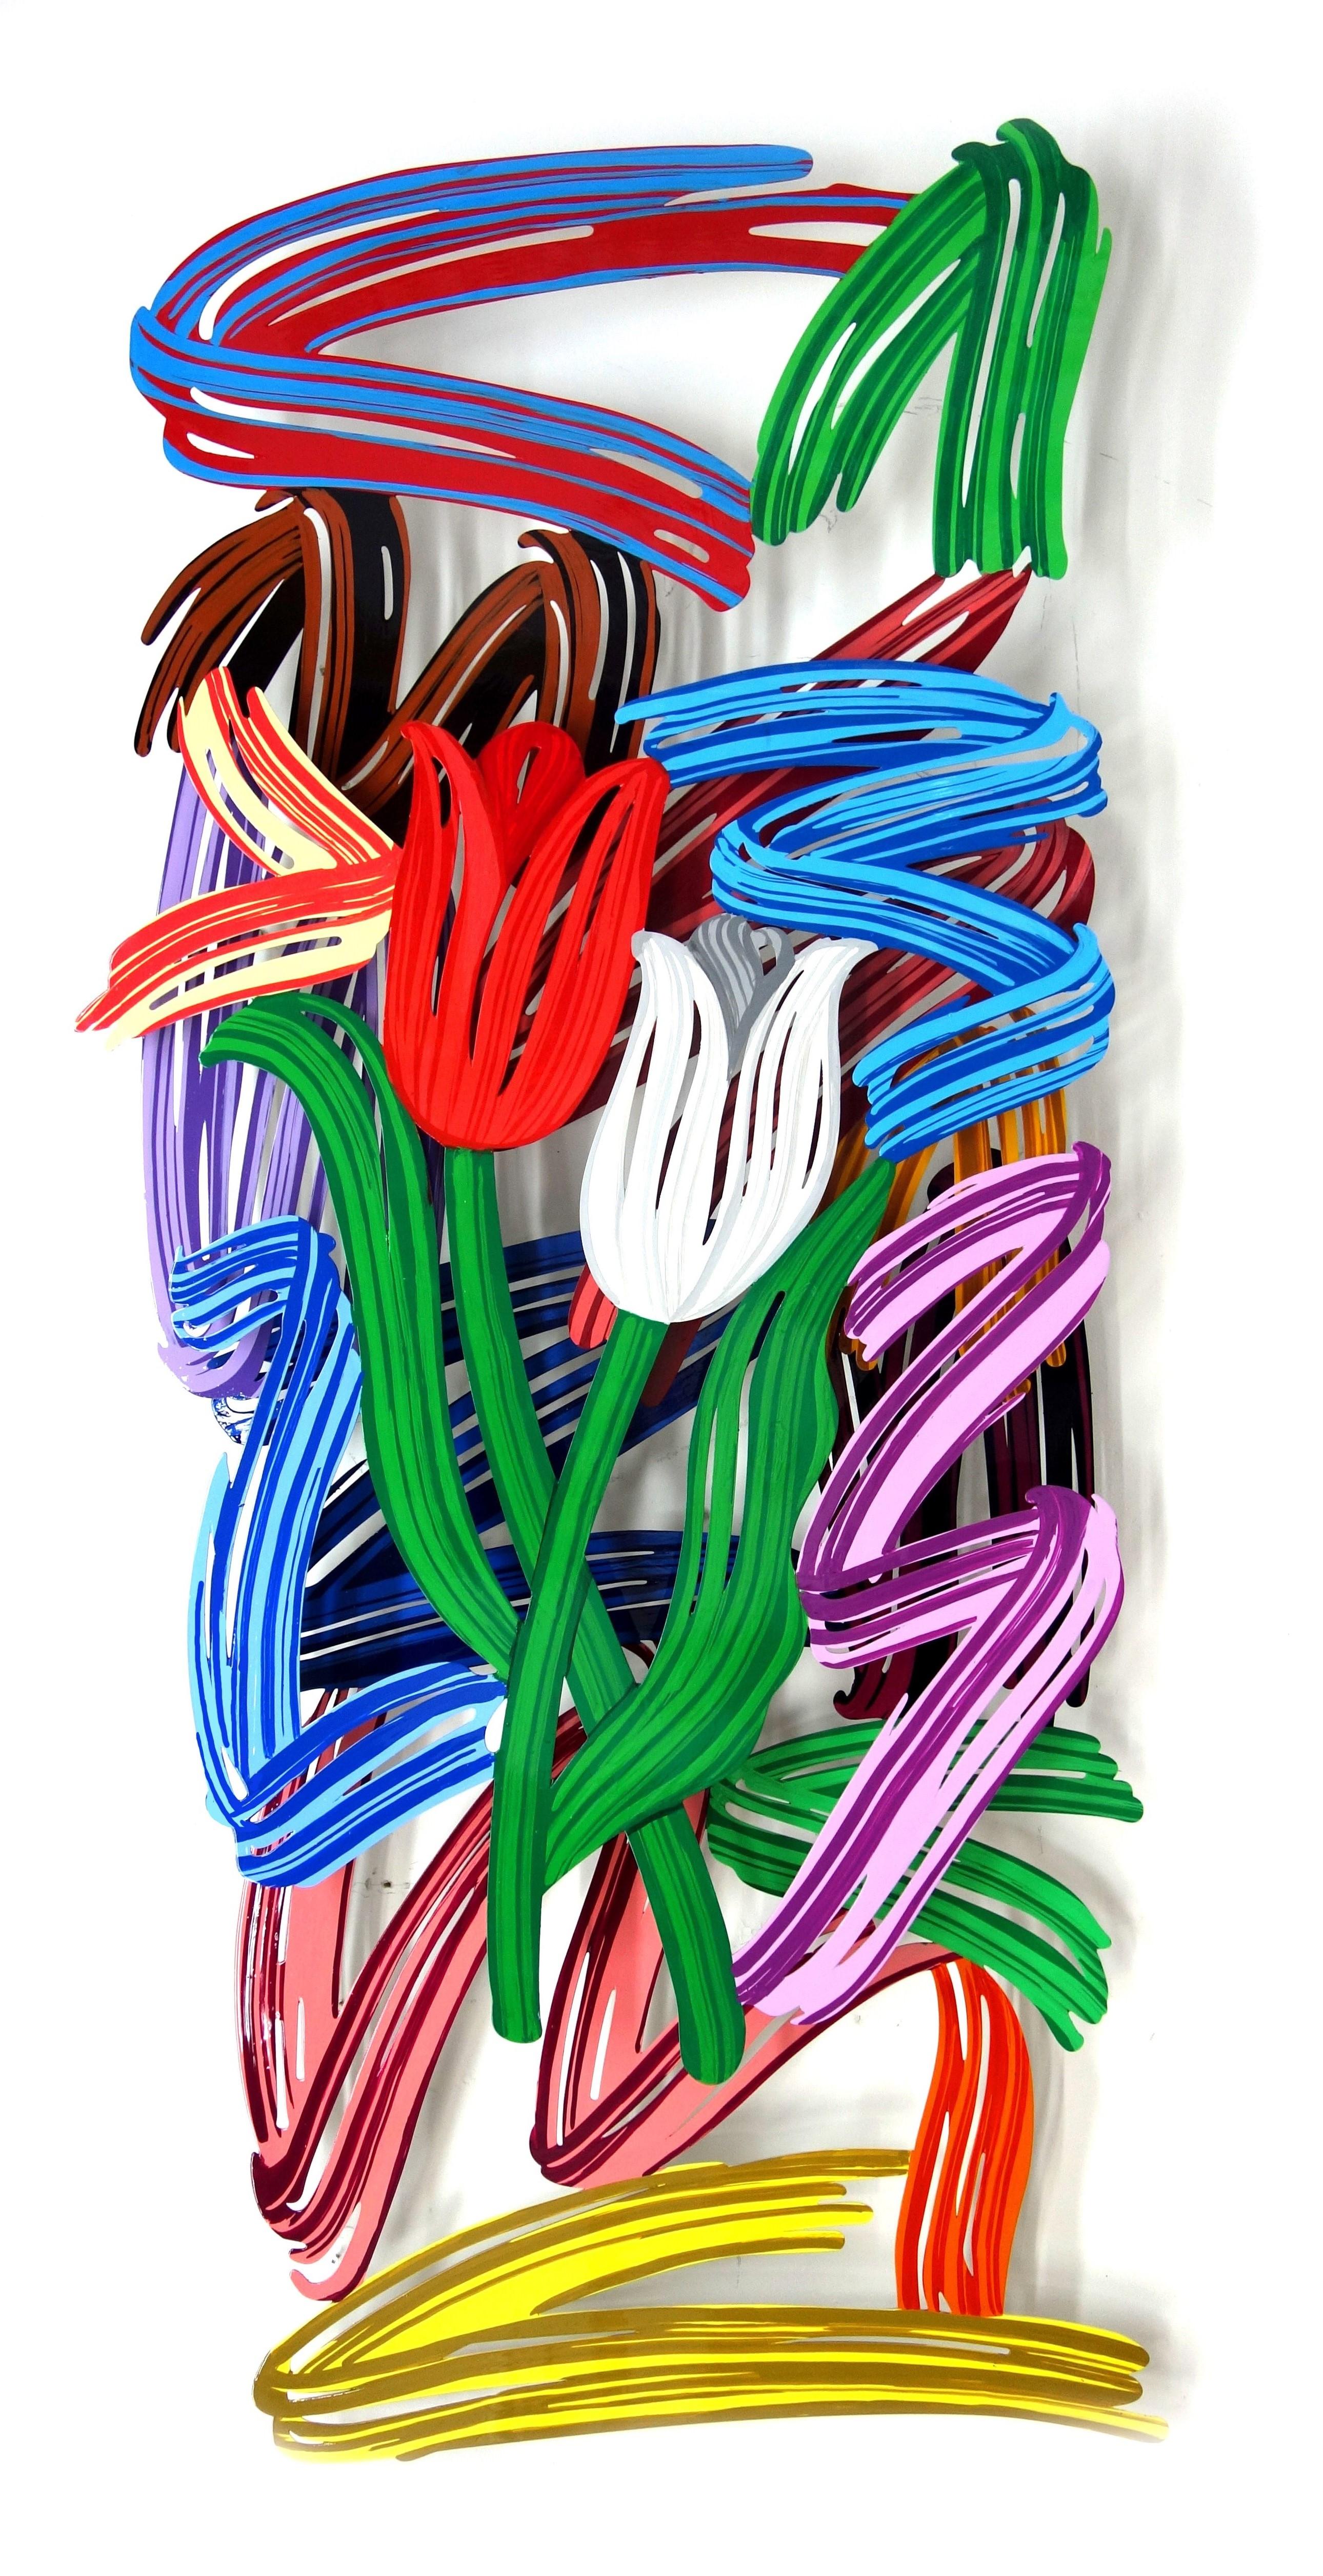 "Tulip Brush Strokes", 3D Hand-painted Metal Wall Sculpture  - Mixed Media Art by David Gerstein